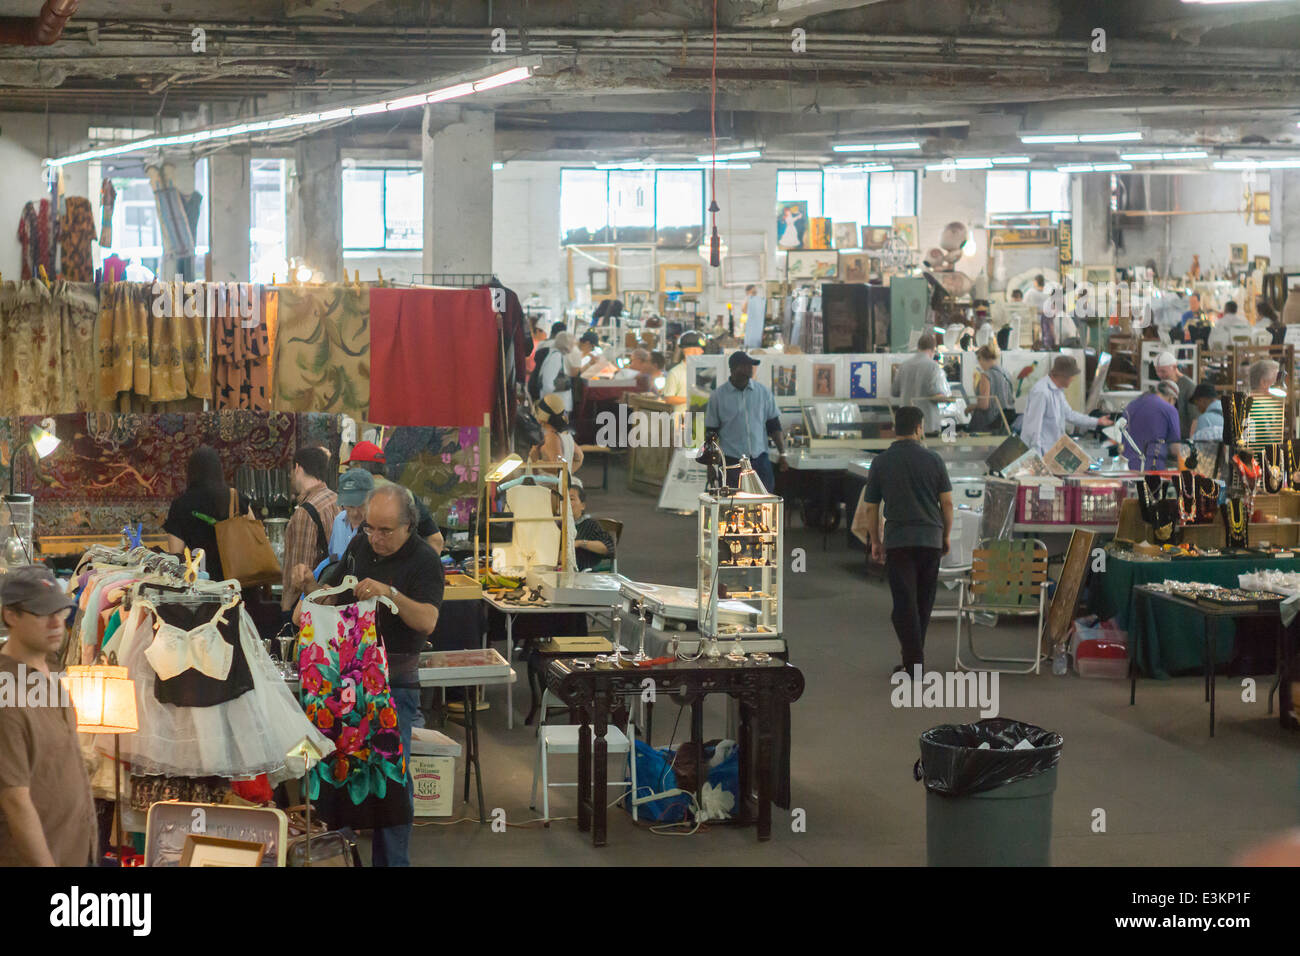 Shoppers search for bargains at the Garage Flea Market in the New York neighborhood of Chelsea Stock Photo